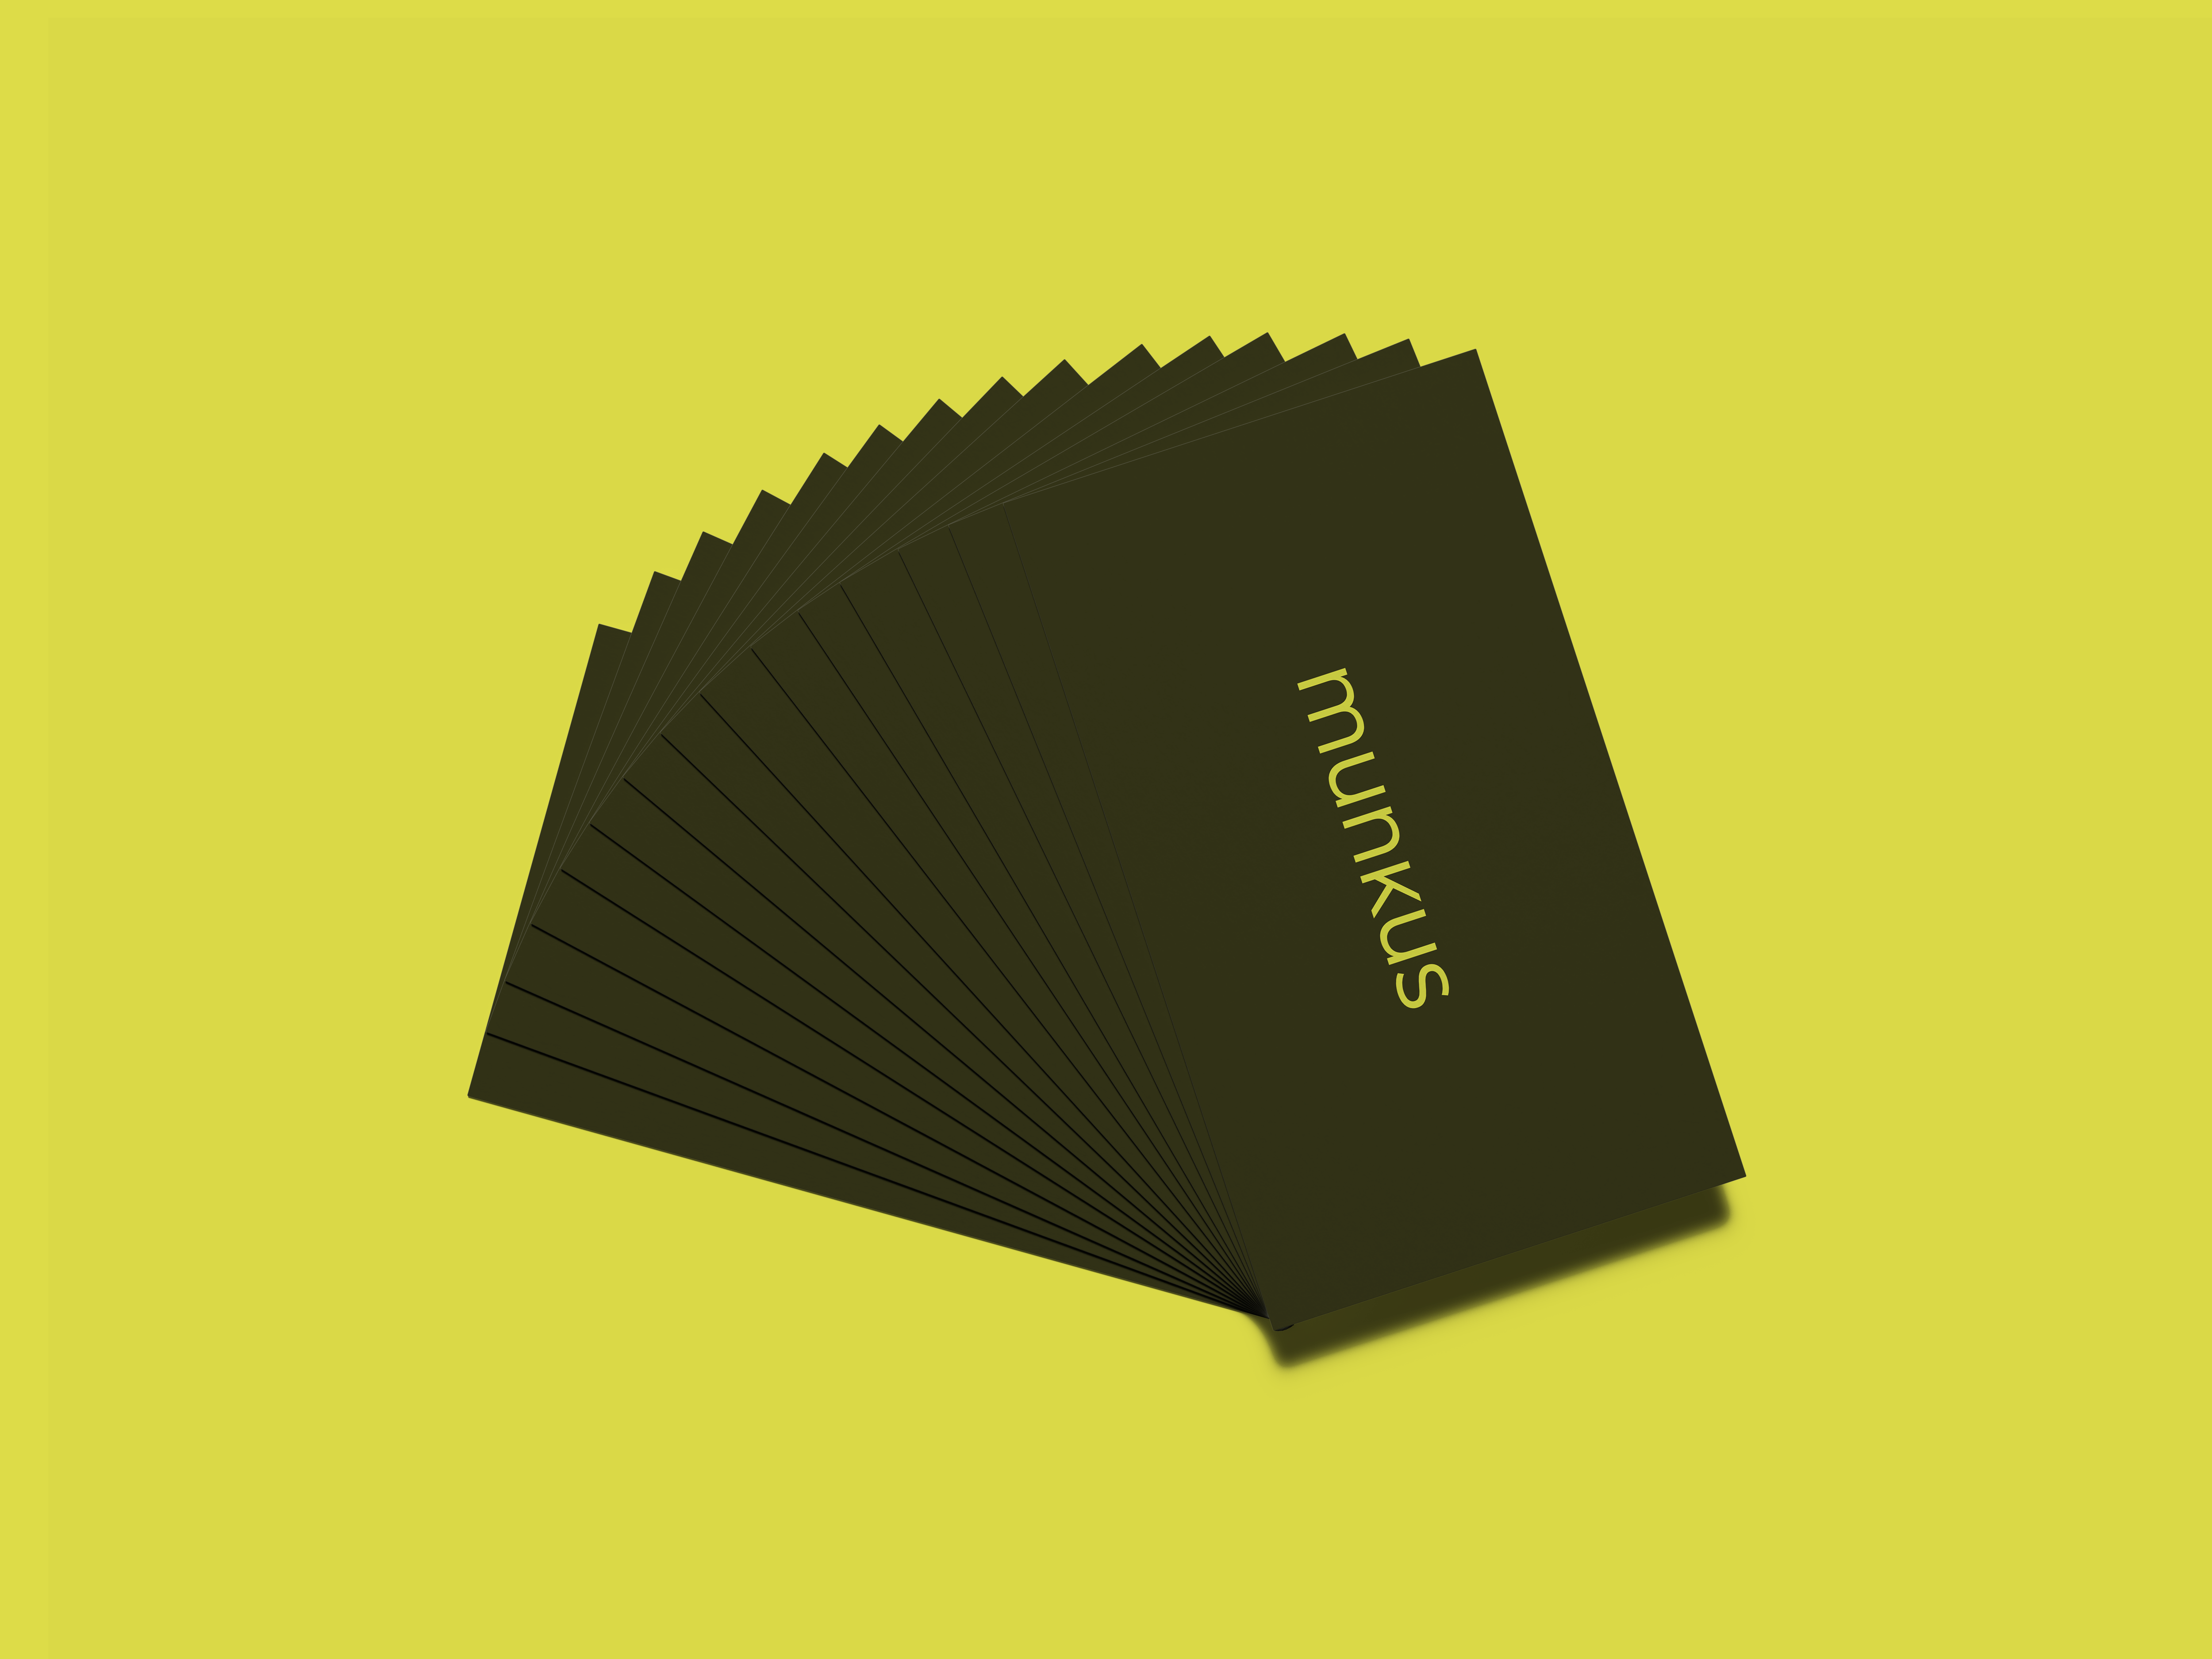 Munkus stacked business cards.